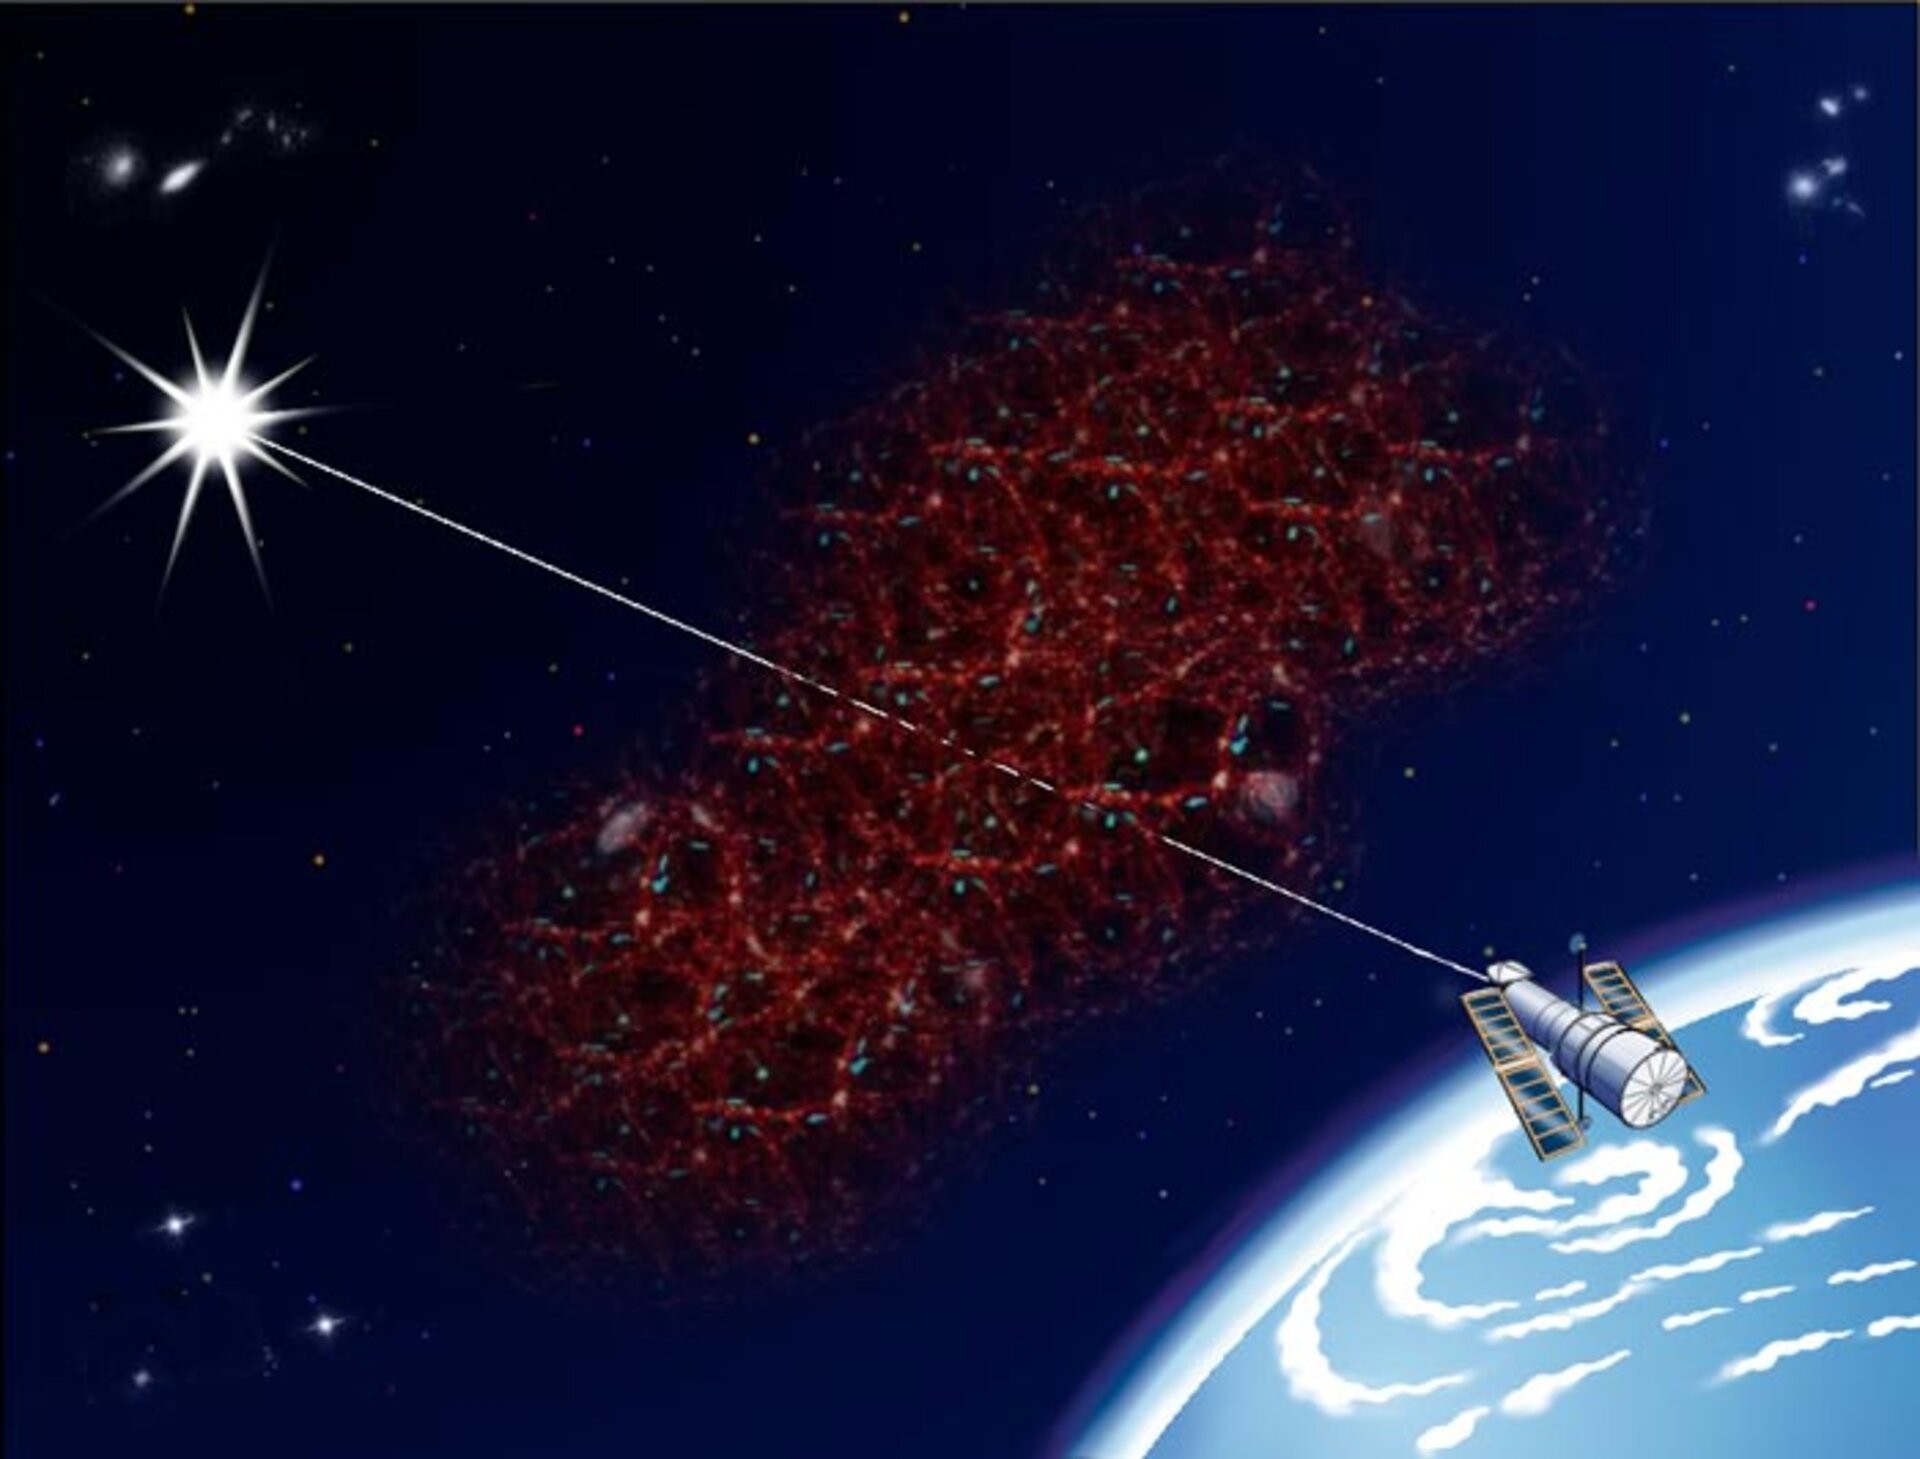 Artist's impression of Hubble detecting vast filaments of invisible hydrogen